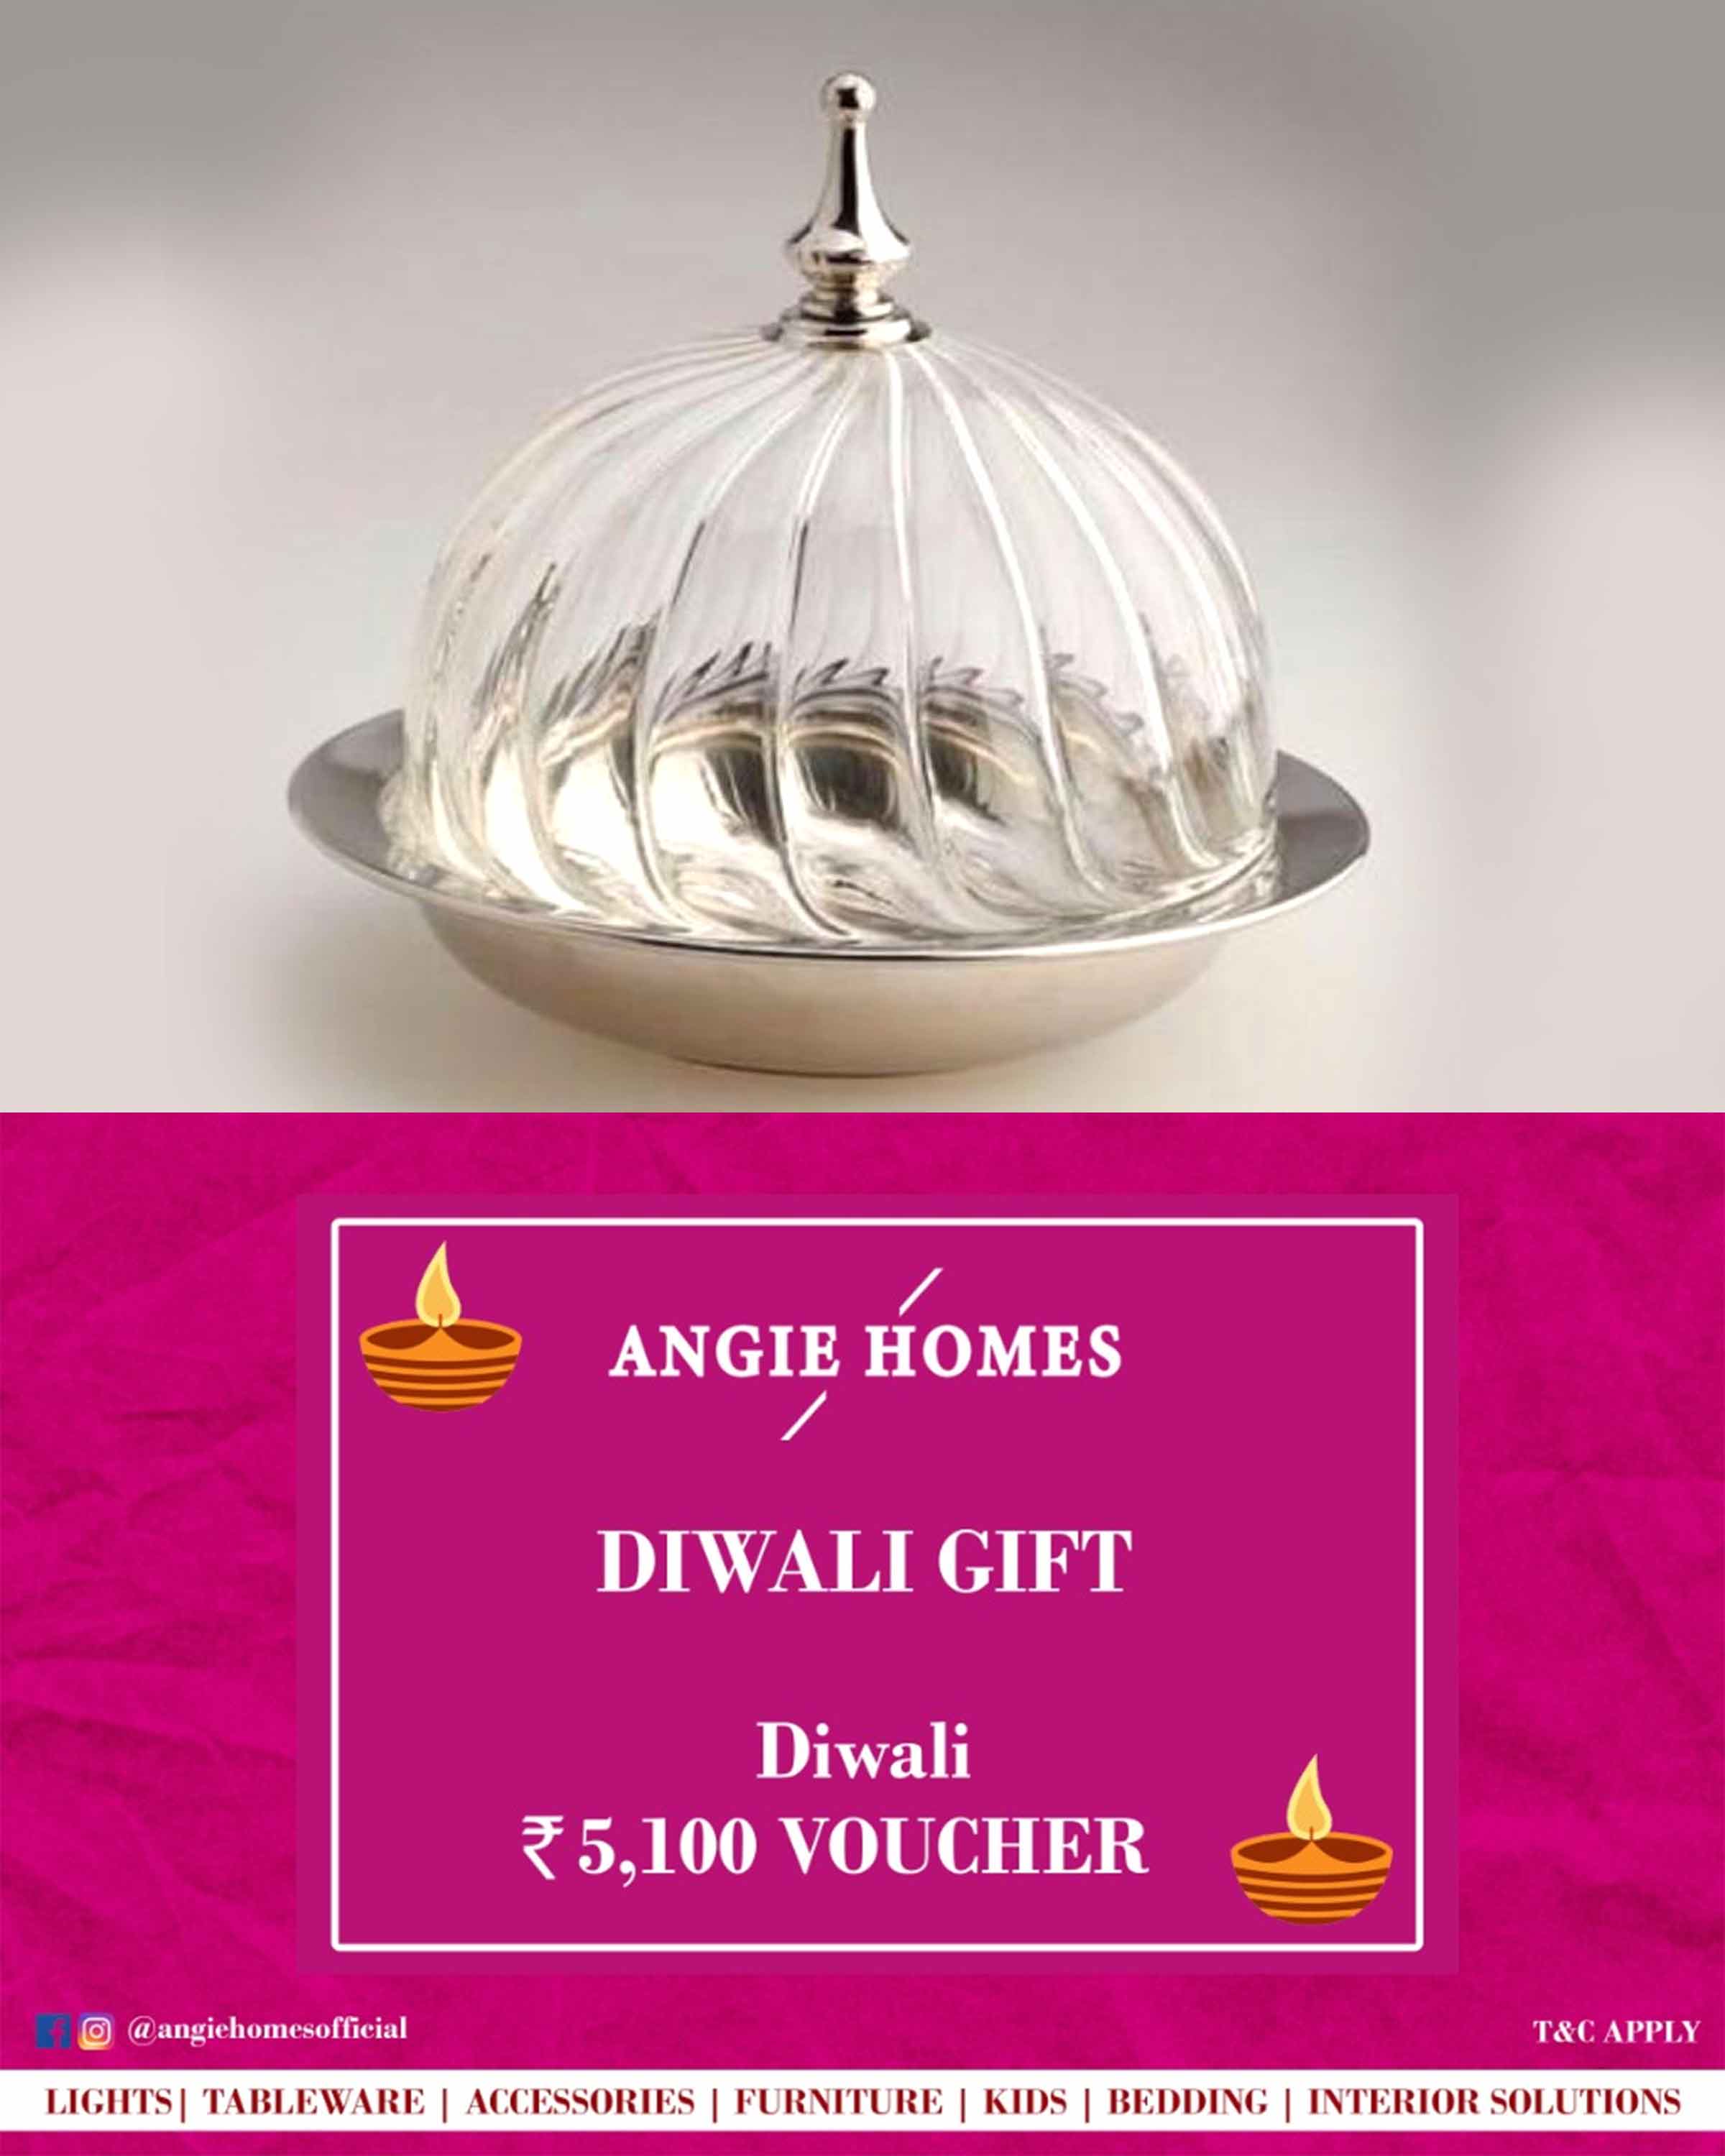 Online Diwali Gift Card Voucher for High Tea Bar Collection ANGIE HOMES